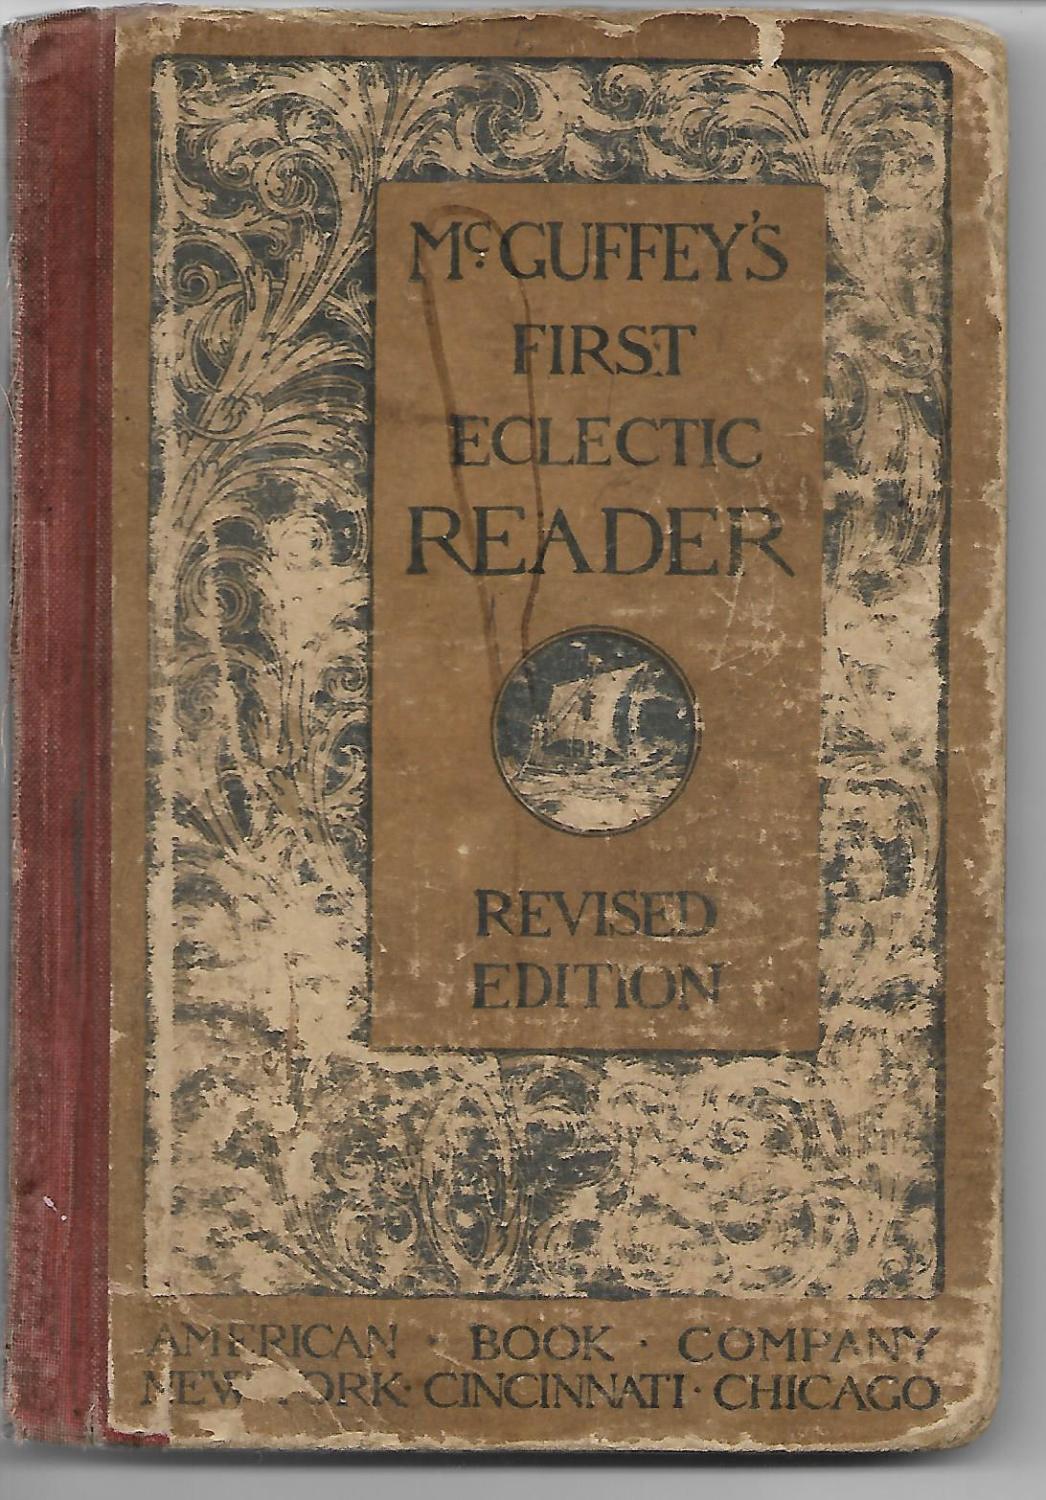 McGuffey's First Eclectic Reader. Revised Edition by William H McGuffey ...